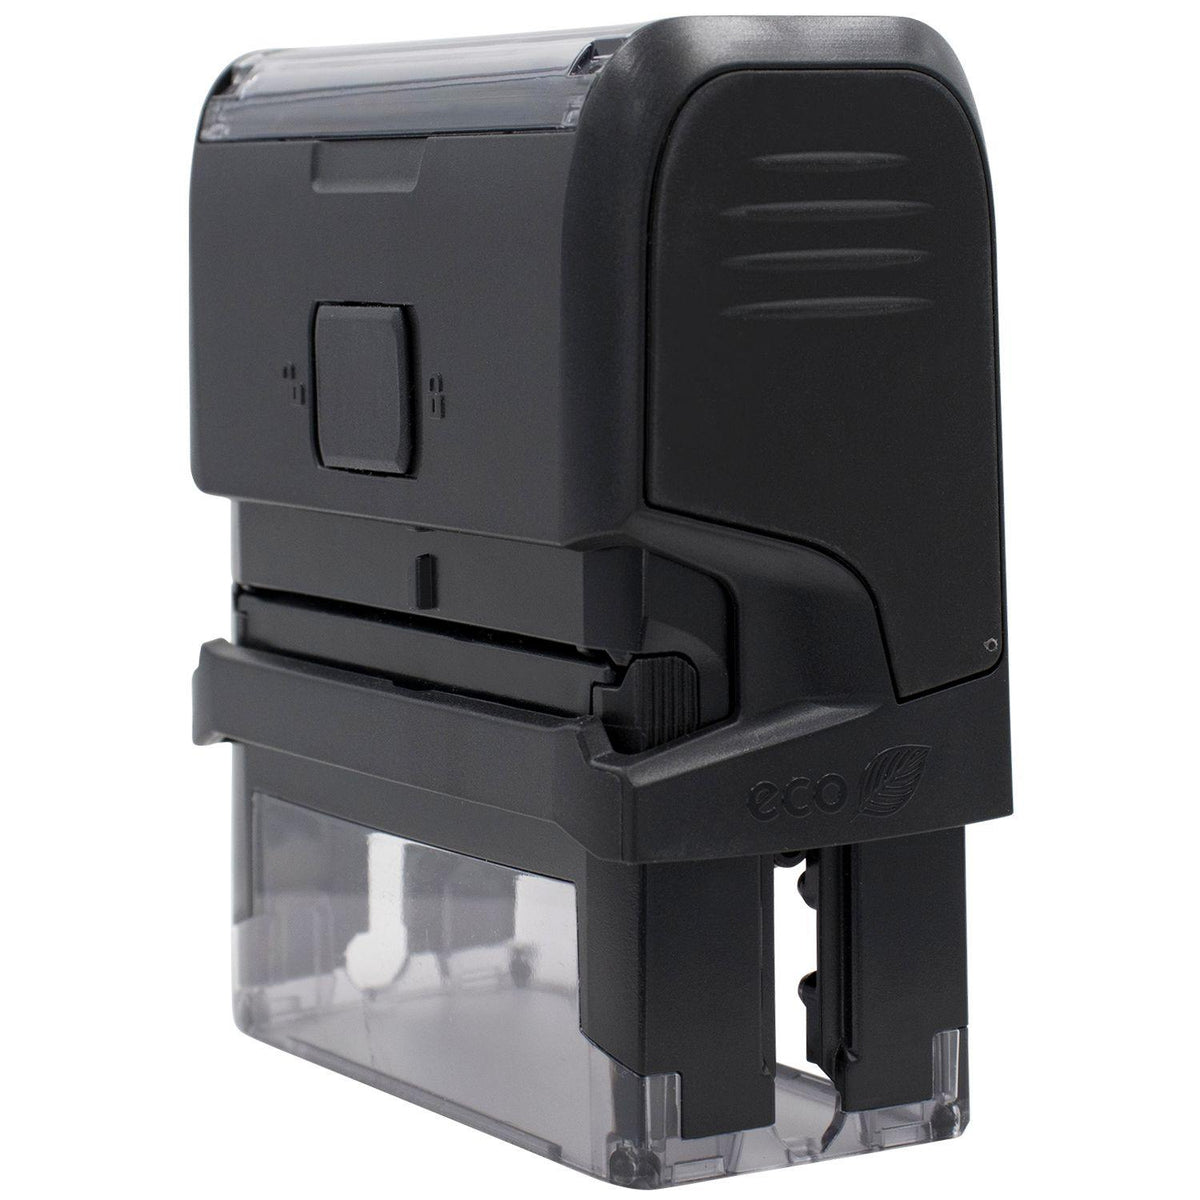 Self-Inking Improving with Chart Icon Stamp - Engineer Seal Stamps - Brand_Trodat, Impression Size_Small, Stamp Type_Self-Inking Stamp, Type of Use_Office, Type of Use_Teacher